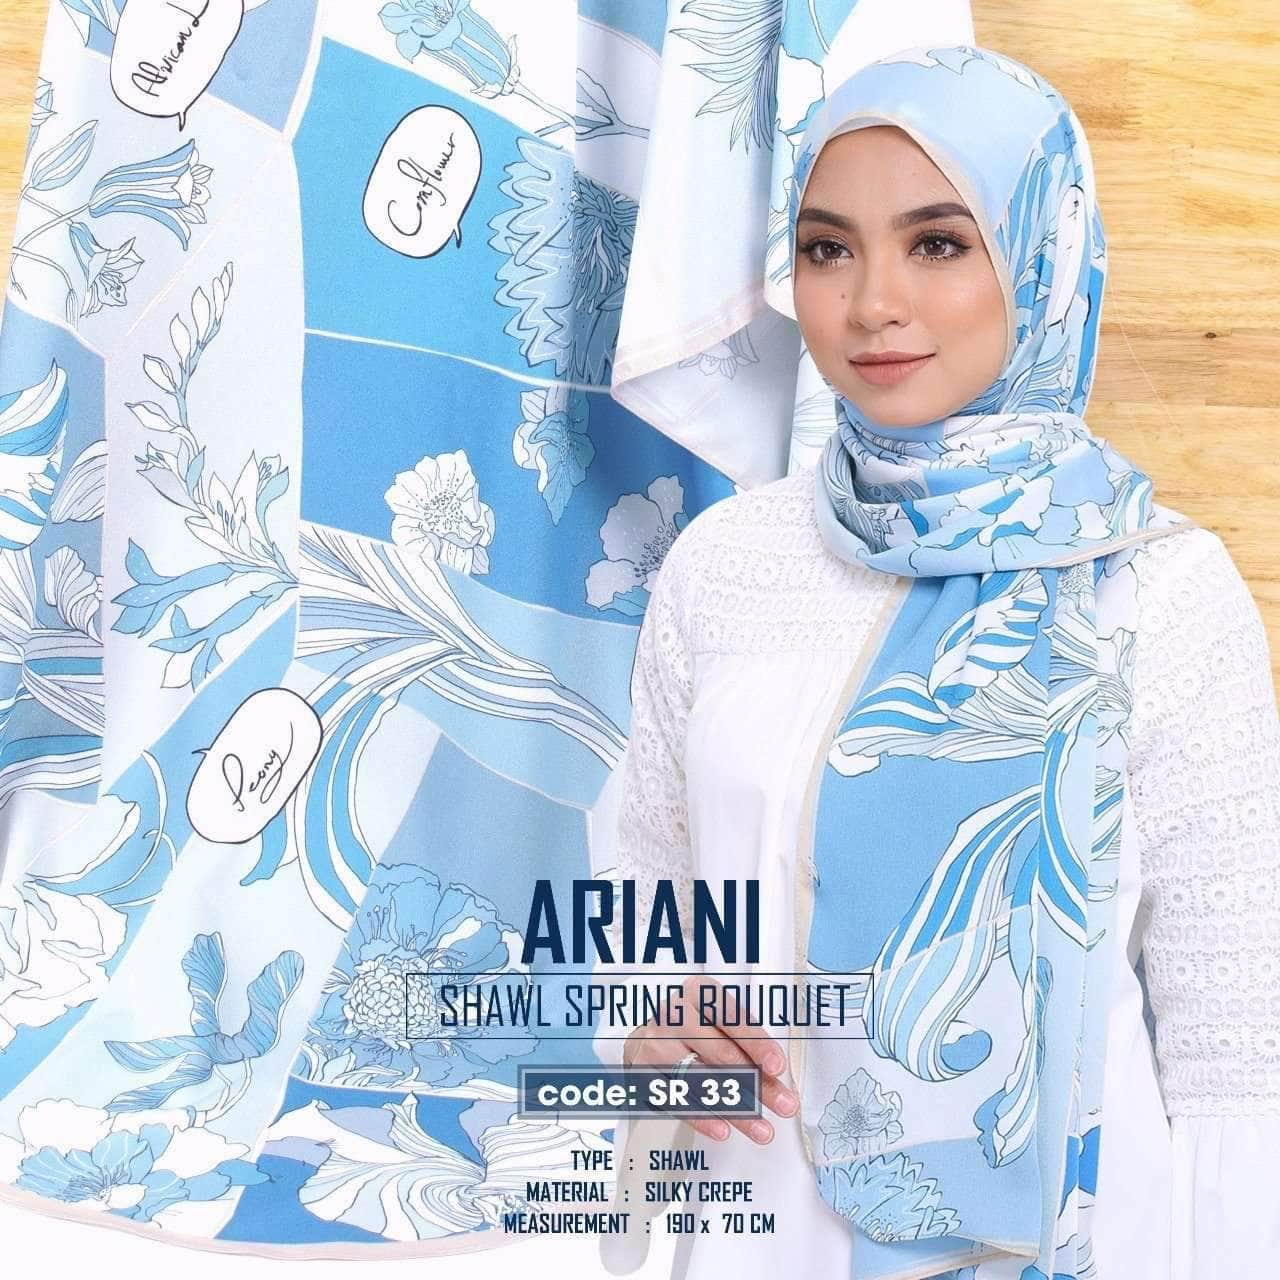 Ariani Shawl Spring Bouquet 3 Colors RM9